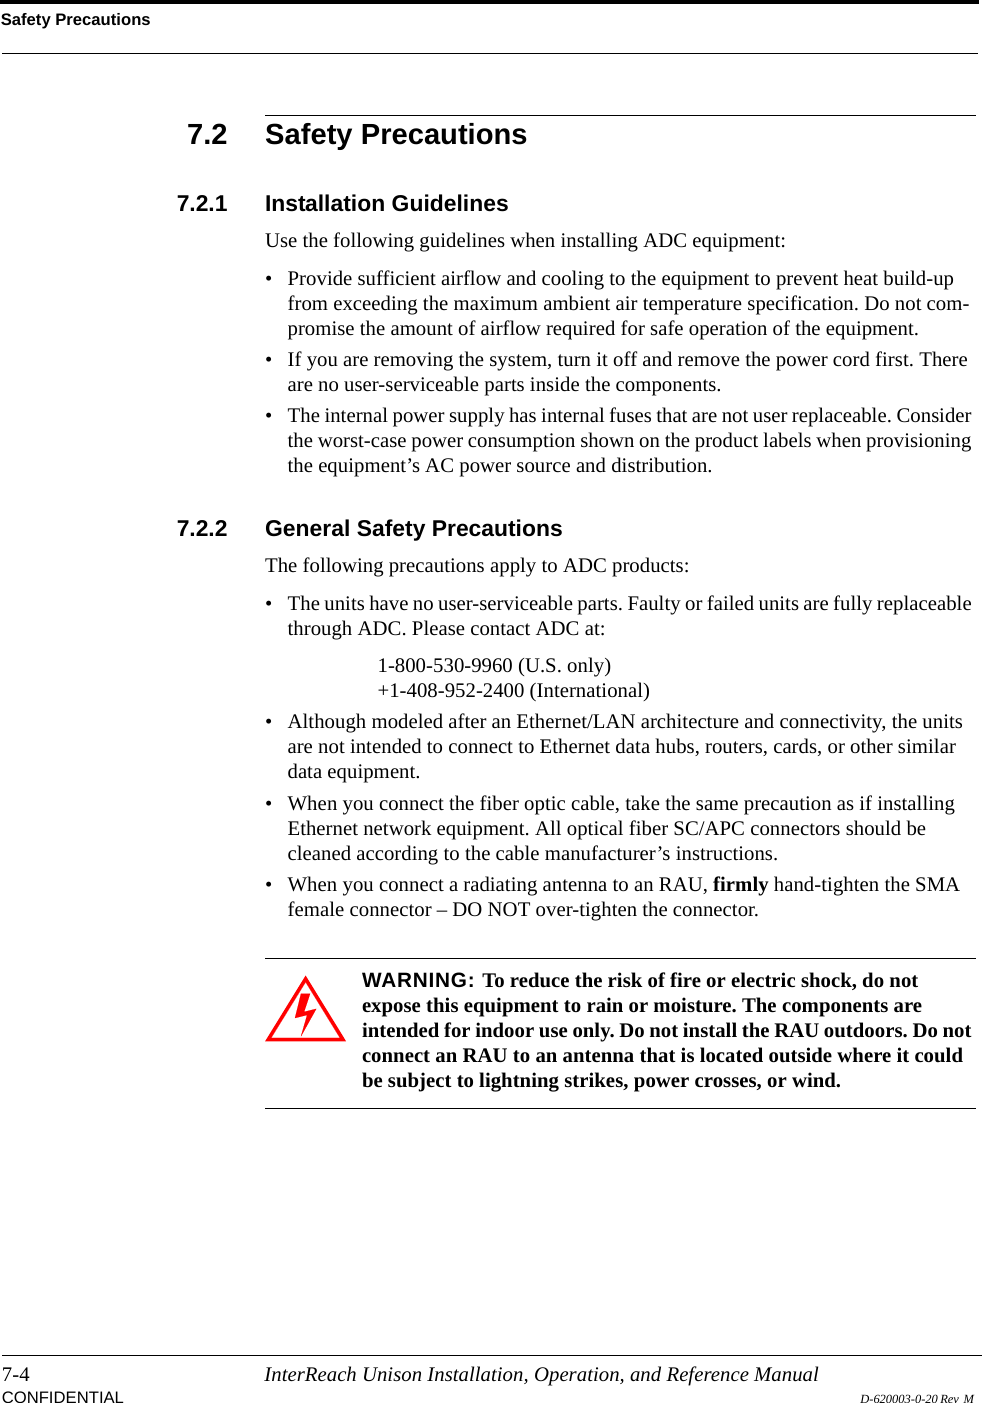 Safety Precautions7-4 InterReach Unison Installation, Operation, and Reference ManualCONFIDENTIAL D-620003-0-20 Rev  M 7.2 Safety Precautions7.2.1 Installation GuidelinesUse the following guidelines when installing ADC equipment:• Provide sufficient airflow and cooling to the equipment to prevent heat build-up from exceeding the maximum ambient air temperature specification. Do not com-promise the amount of airflow required for safe operation of the equipment.• If you are removing the system, turn it off and remove the power cord first. There are no user-serviceable parts inside the components.• The internal power supply has internal fuses that are not user replaceable. Consider the worst-case power consumption shown on the product labels when provisioning the equipment’s AC power source and distribution.7.2.2 General Safety PrecautionsThe following precautions apply to ADC products:• The units have no user-serviceable parts. Faulty or failed units are fully replaceable through ADC. Please contact ADC at:1-800-530-9960 (U.S. only)+1-408-952-2400 (International)• Although modeled after an Ethernet/LAN architecture and connectivity, the units are not intended to connect to Ethernet data hubs, routers, cards, or other similar data equipment.• When you connect the fiber optic cable, take the same precaution as if installing Ethernet network equipment. All optical fiber SC/APC connectors should be cleaned according to the cable manufacturer’s instructions.• When you connect a radiating antenna to an RAU, firmly hand-tighten the SMA female connector – DO NOT over-tighten the connector.WARNING: To reduce the risk of fire or electric shock, do not expose this equipment to rain or moisture. The components are intended for indoor use only. Do not install the RAU outdoors. Do not connect an RAU to an antenna that is located outside where it could be subject to lightning strikes, power crosses, or wind.